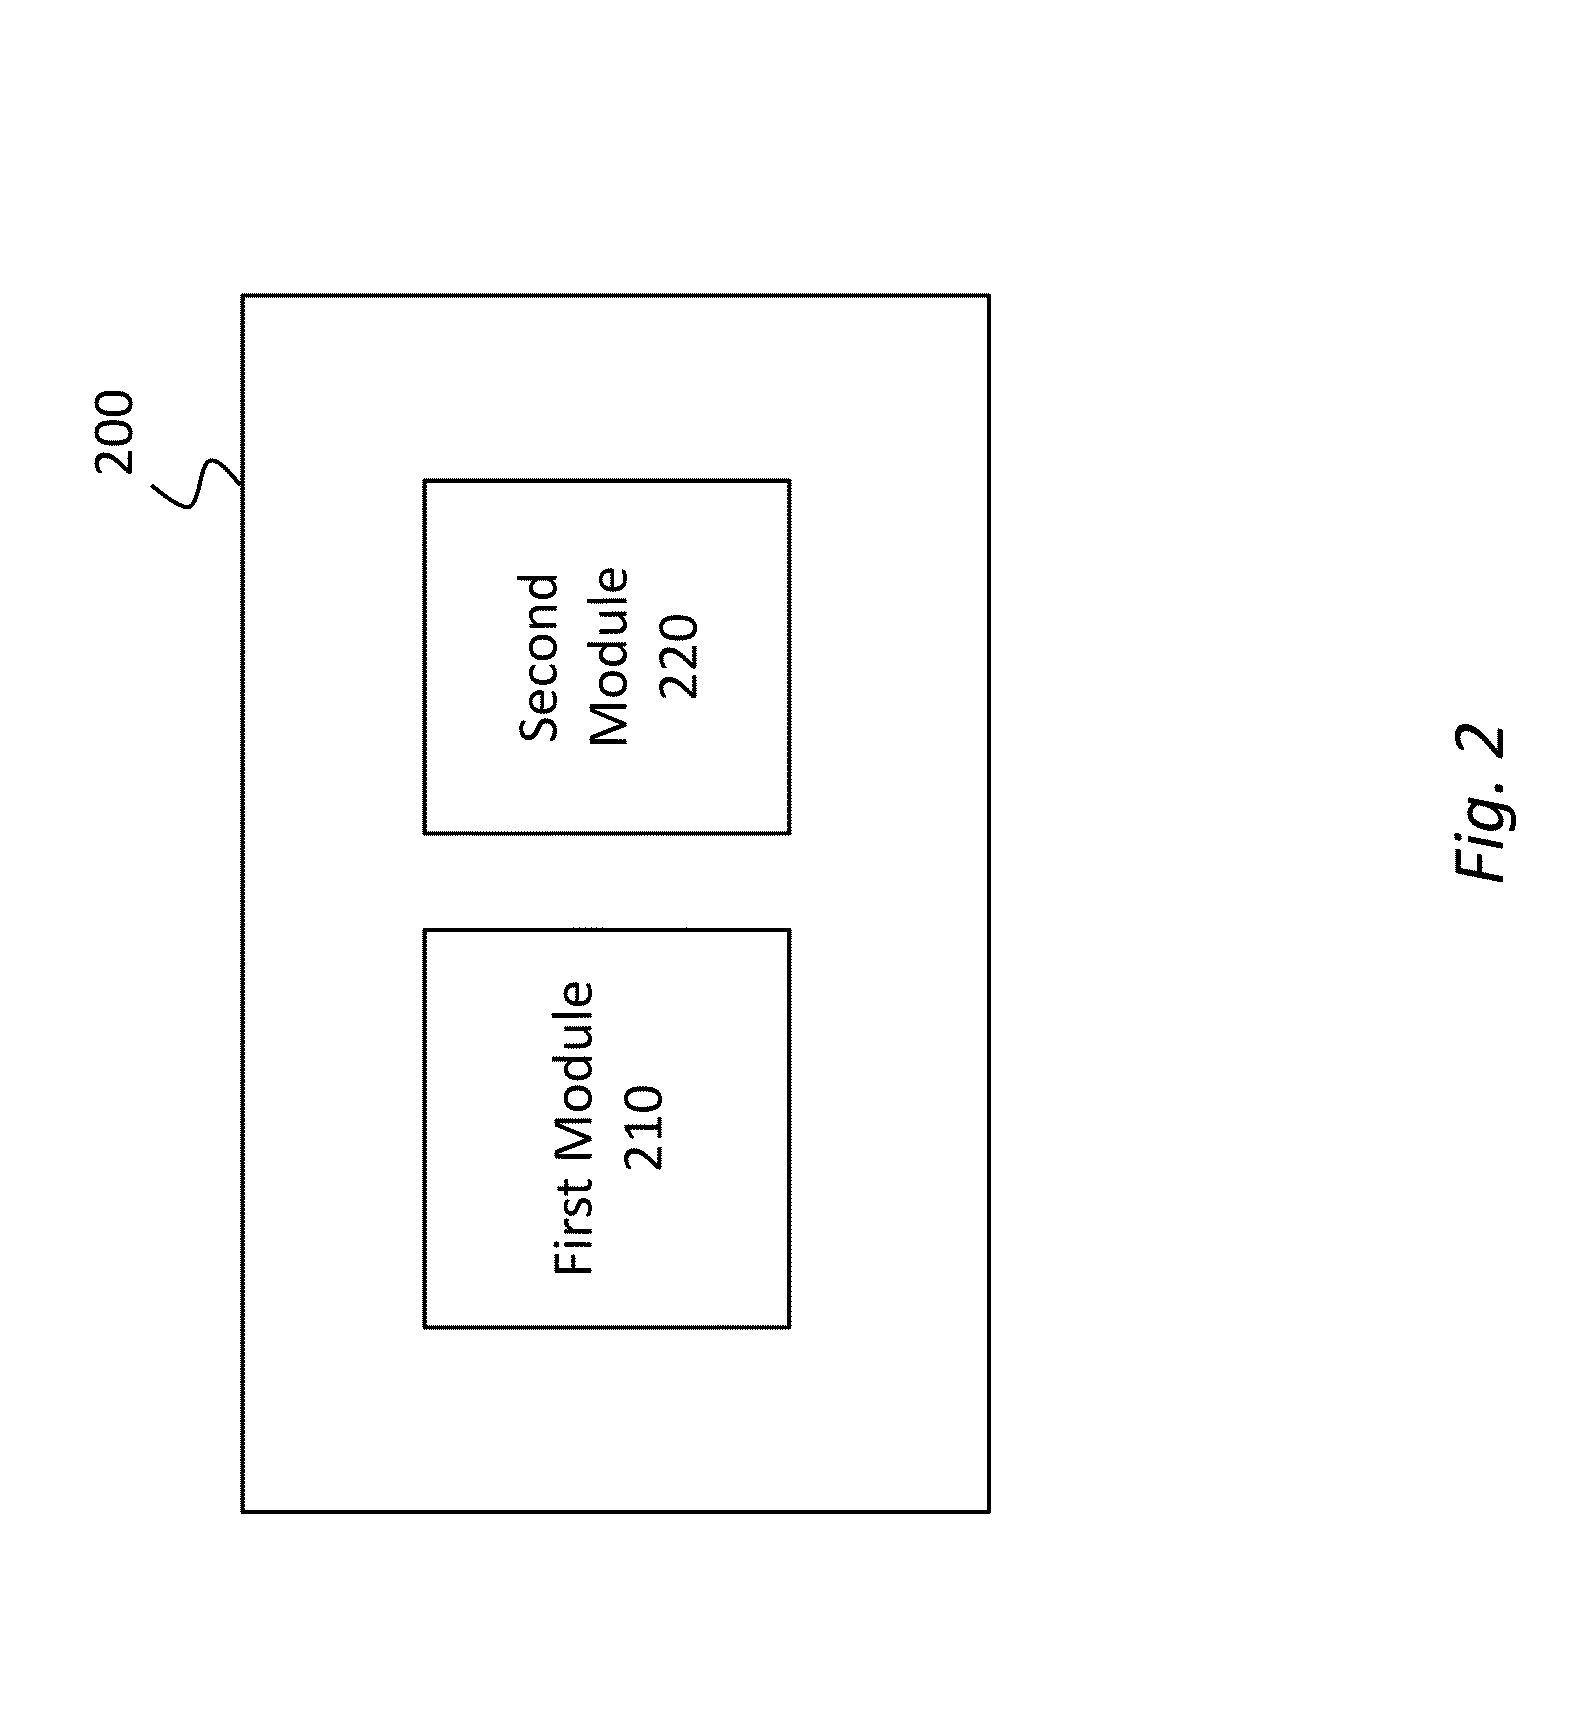 Method and apparatus for dynamic radio emission compliance monitoring